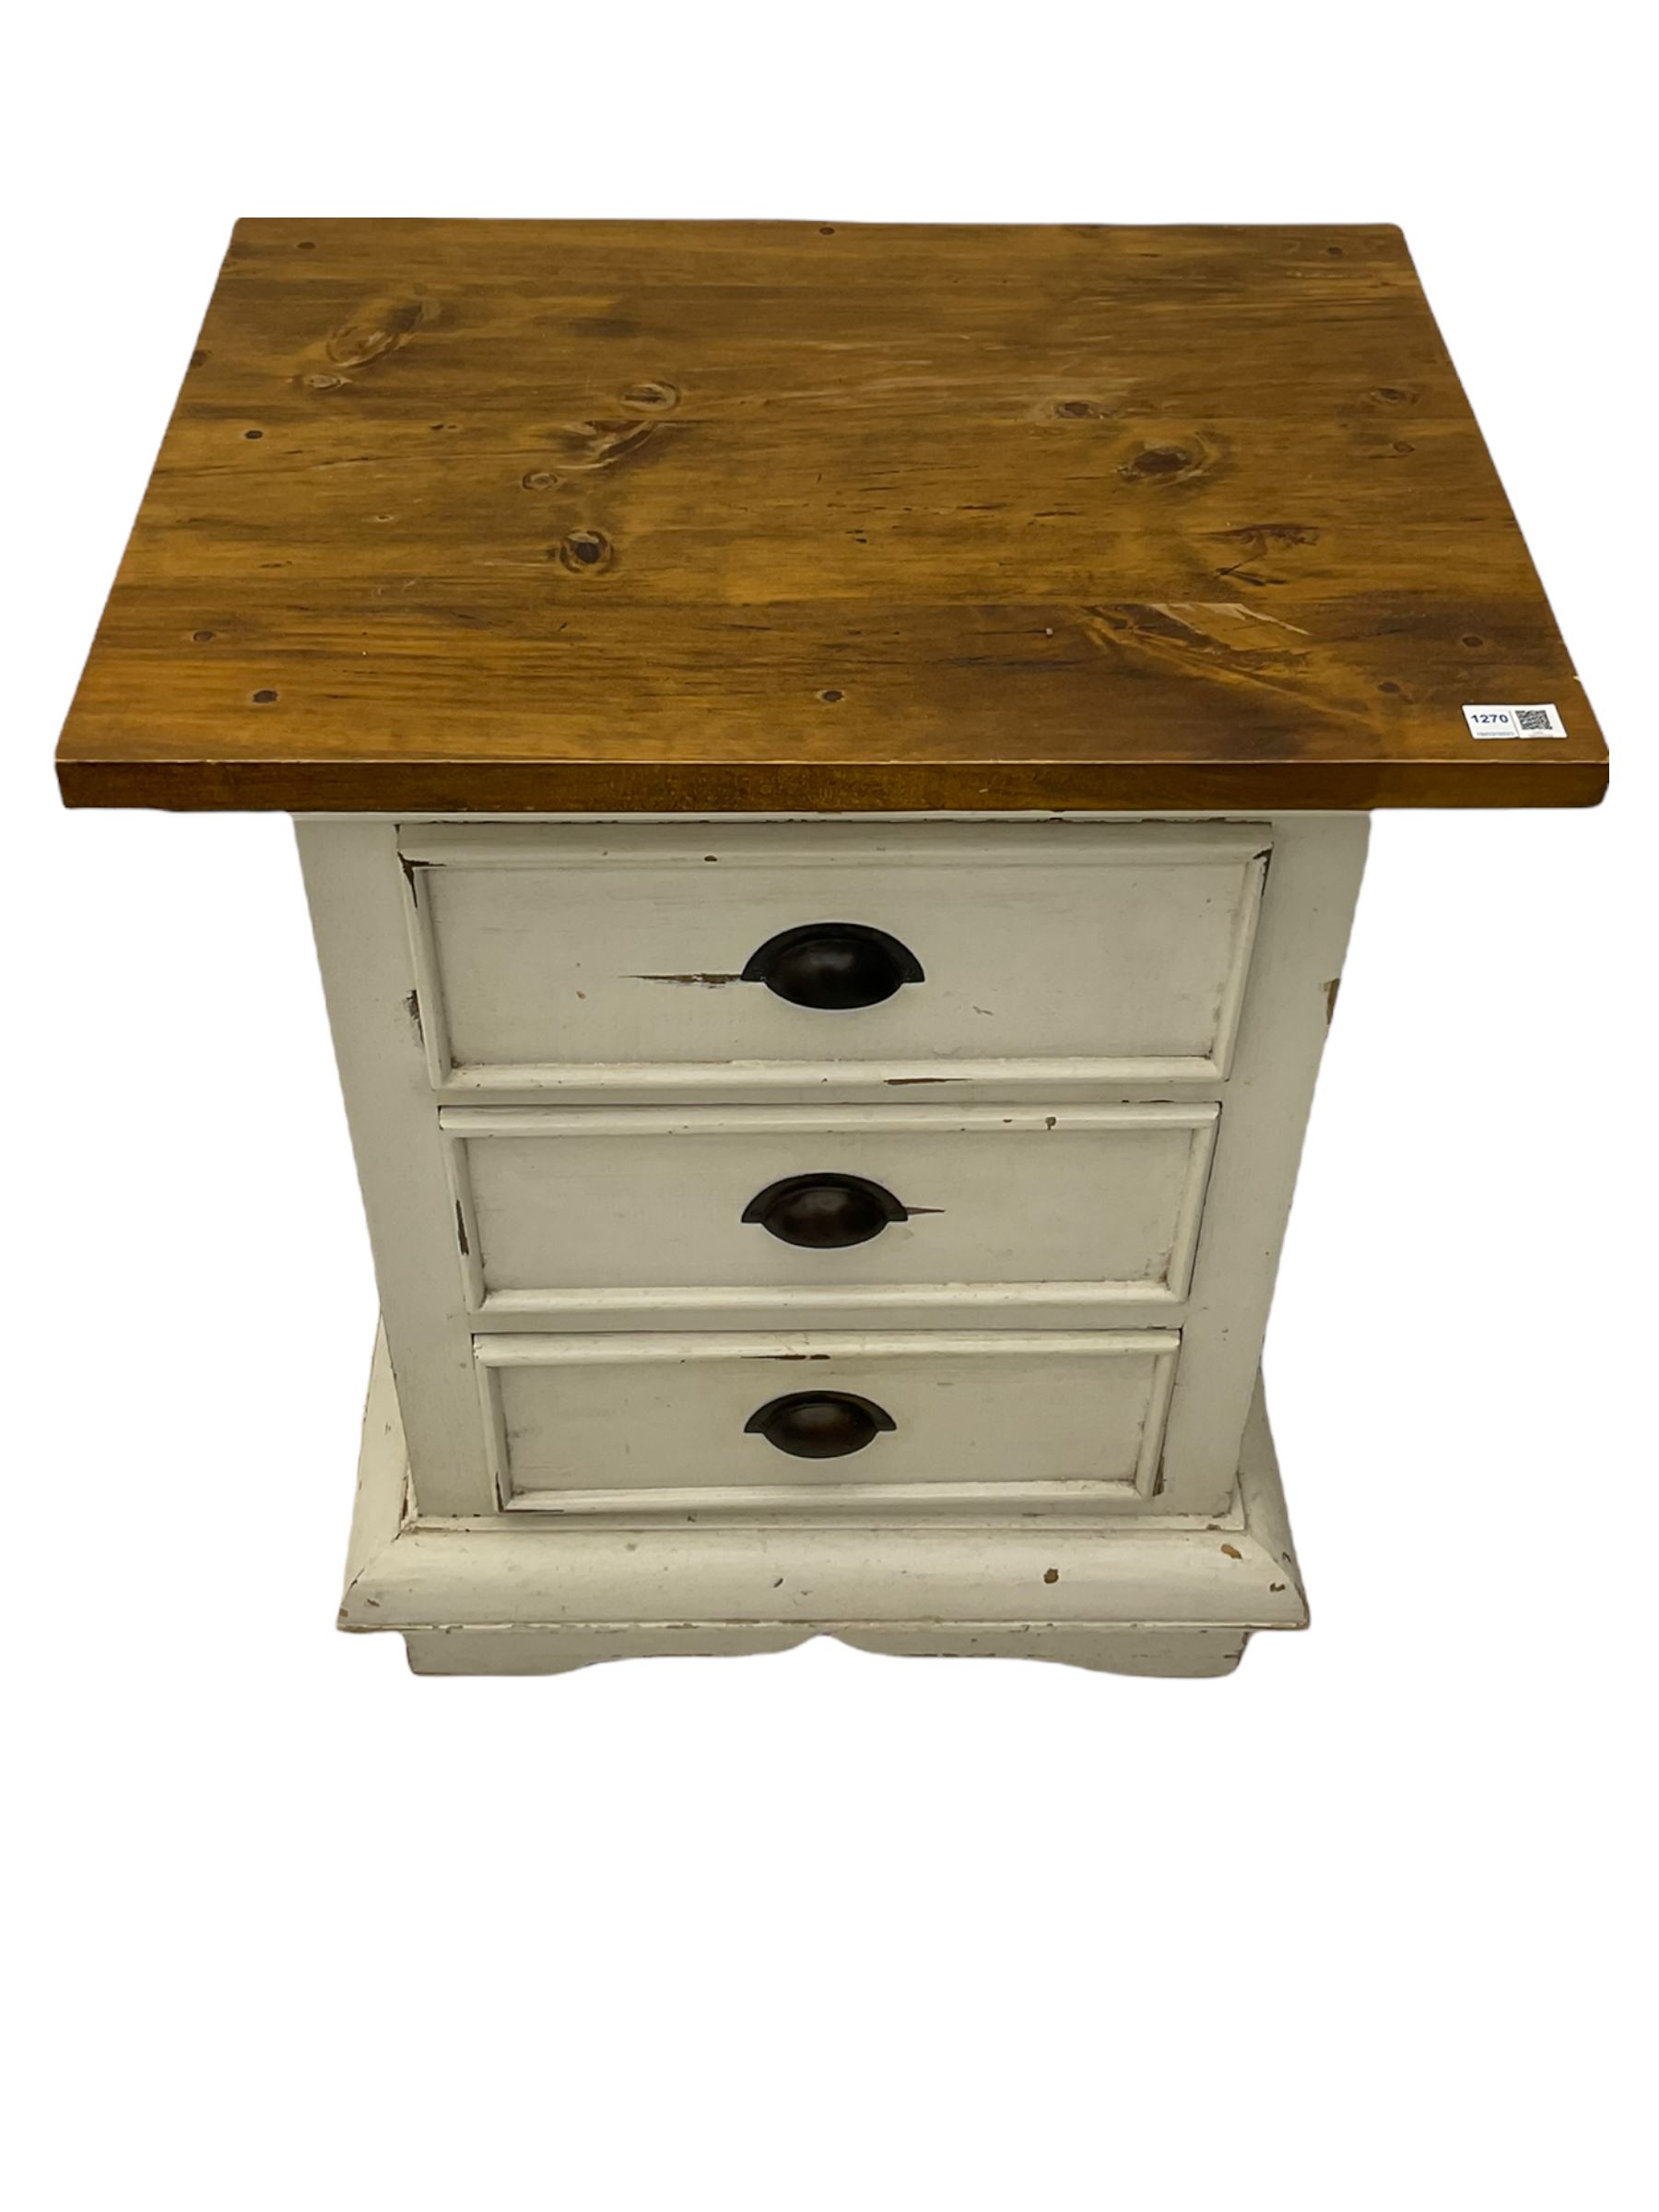 Painted three drawer pedestal chest - Image 2 of 5